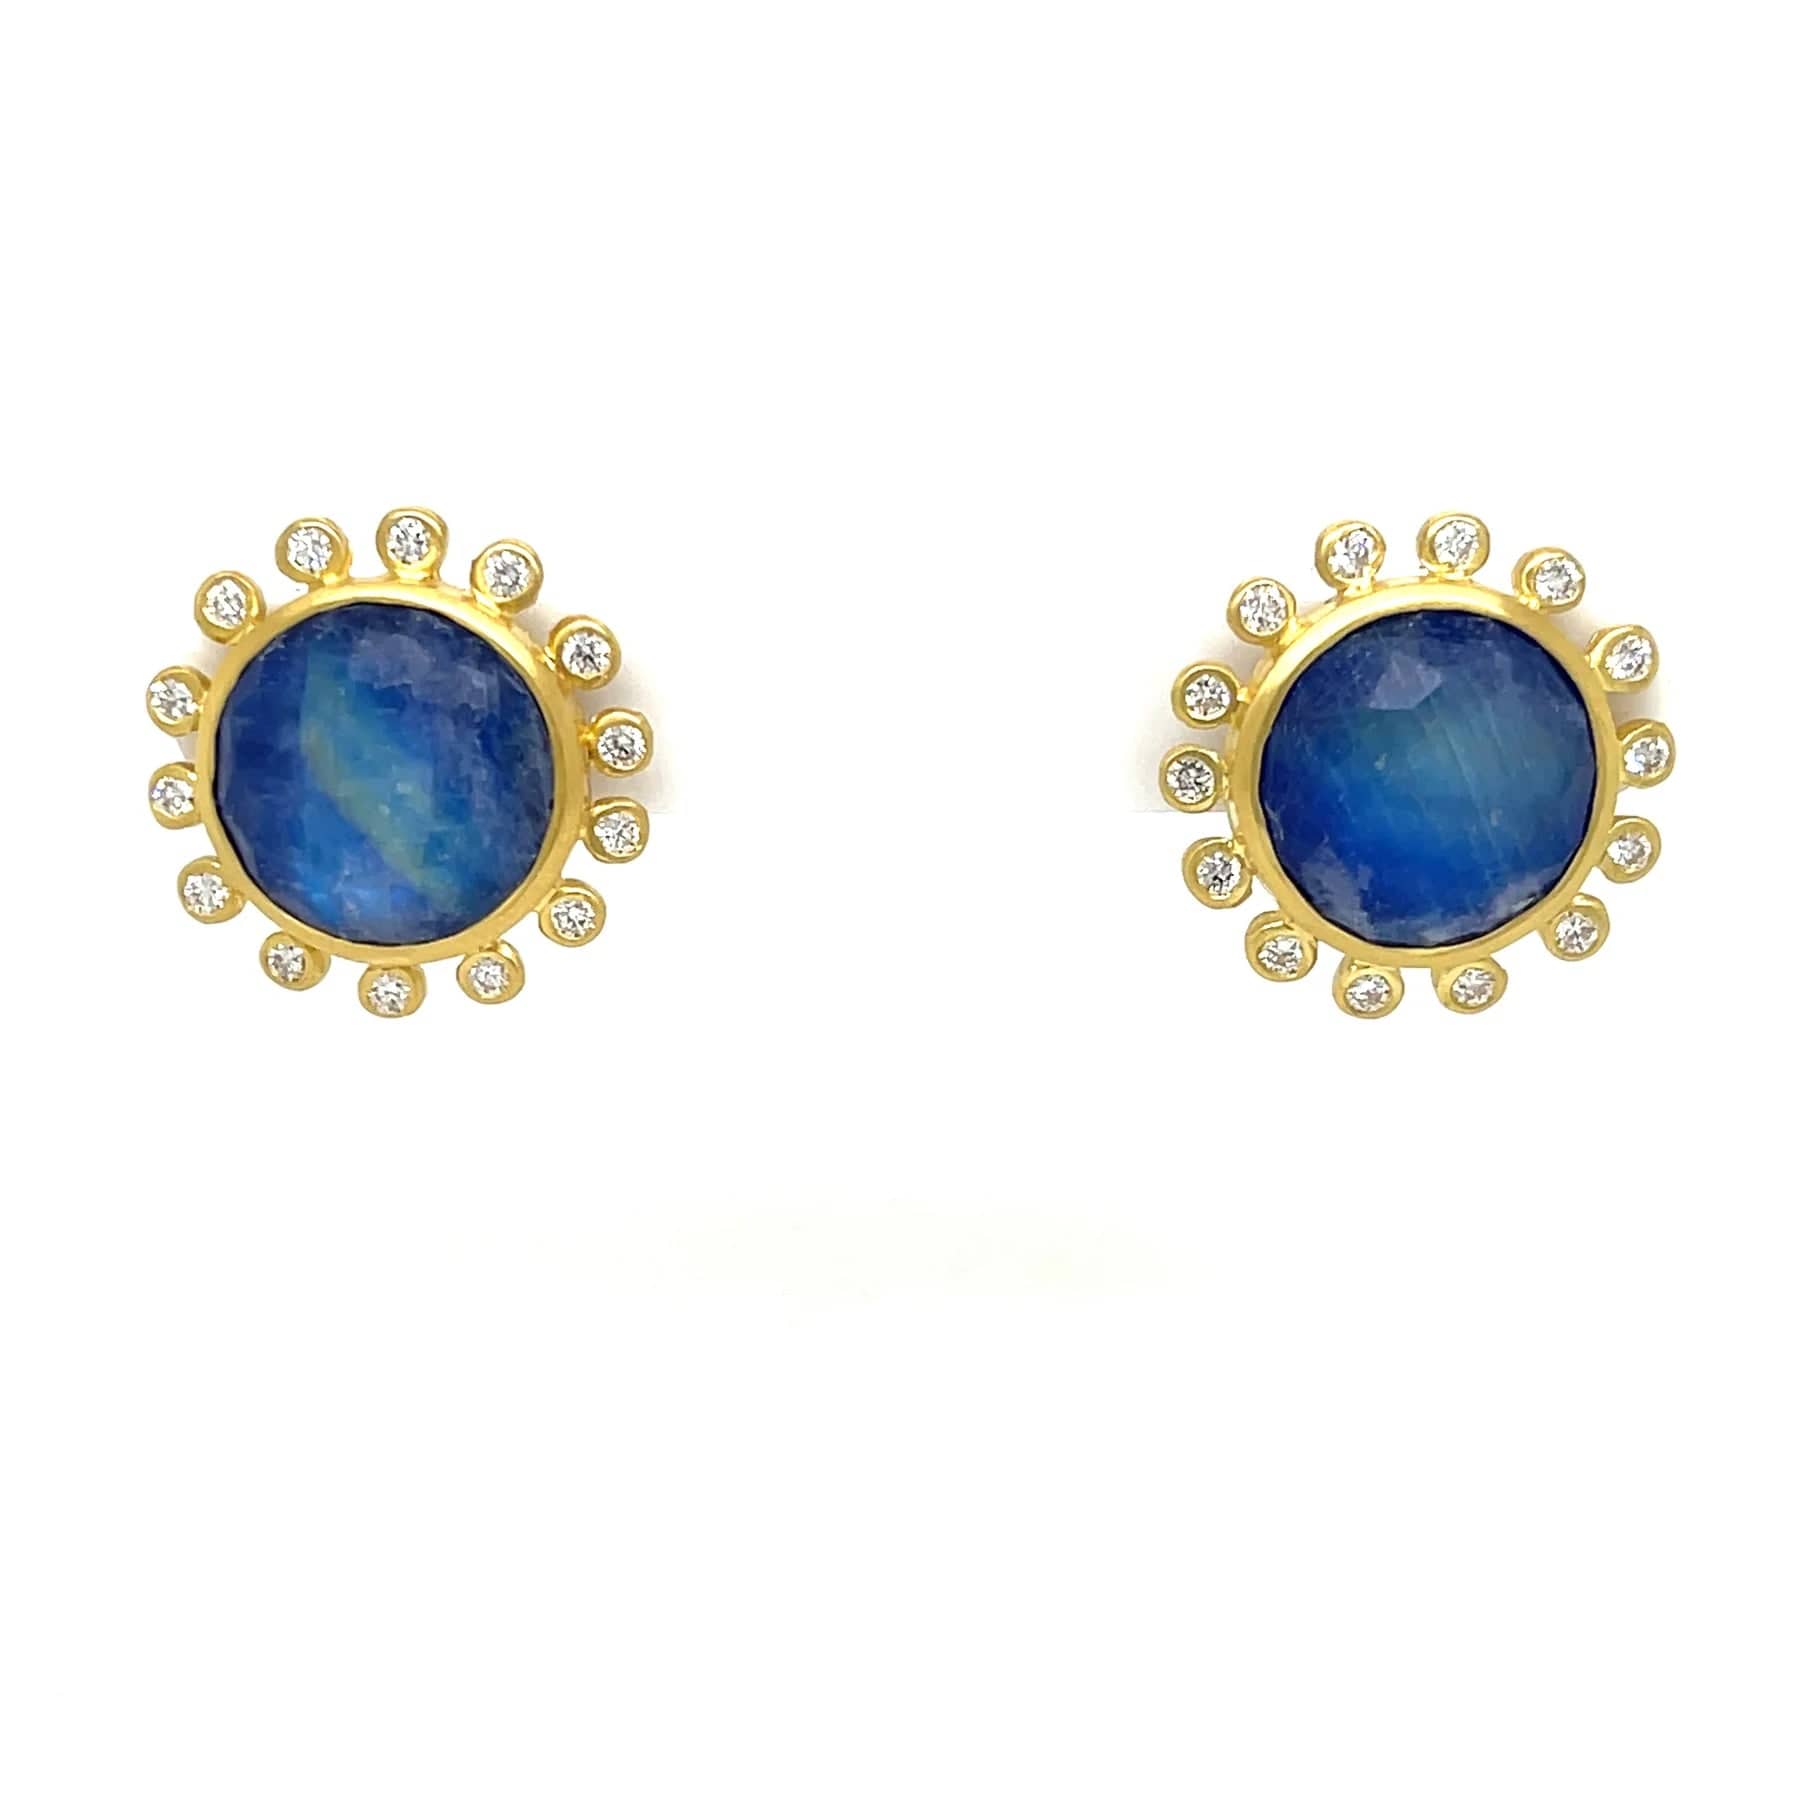 Gold Filled Hoop Earrings with Lapis Lazuli Beads